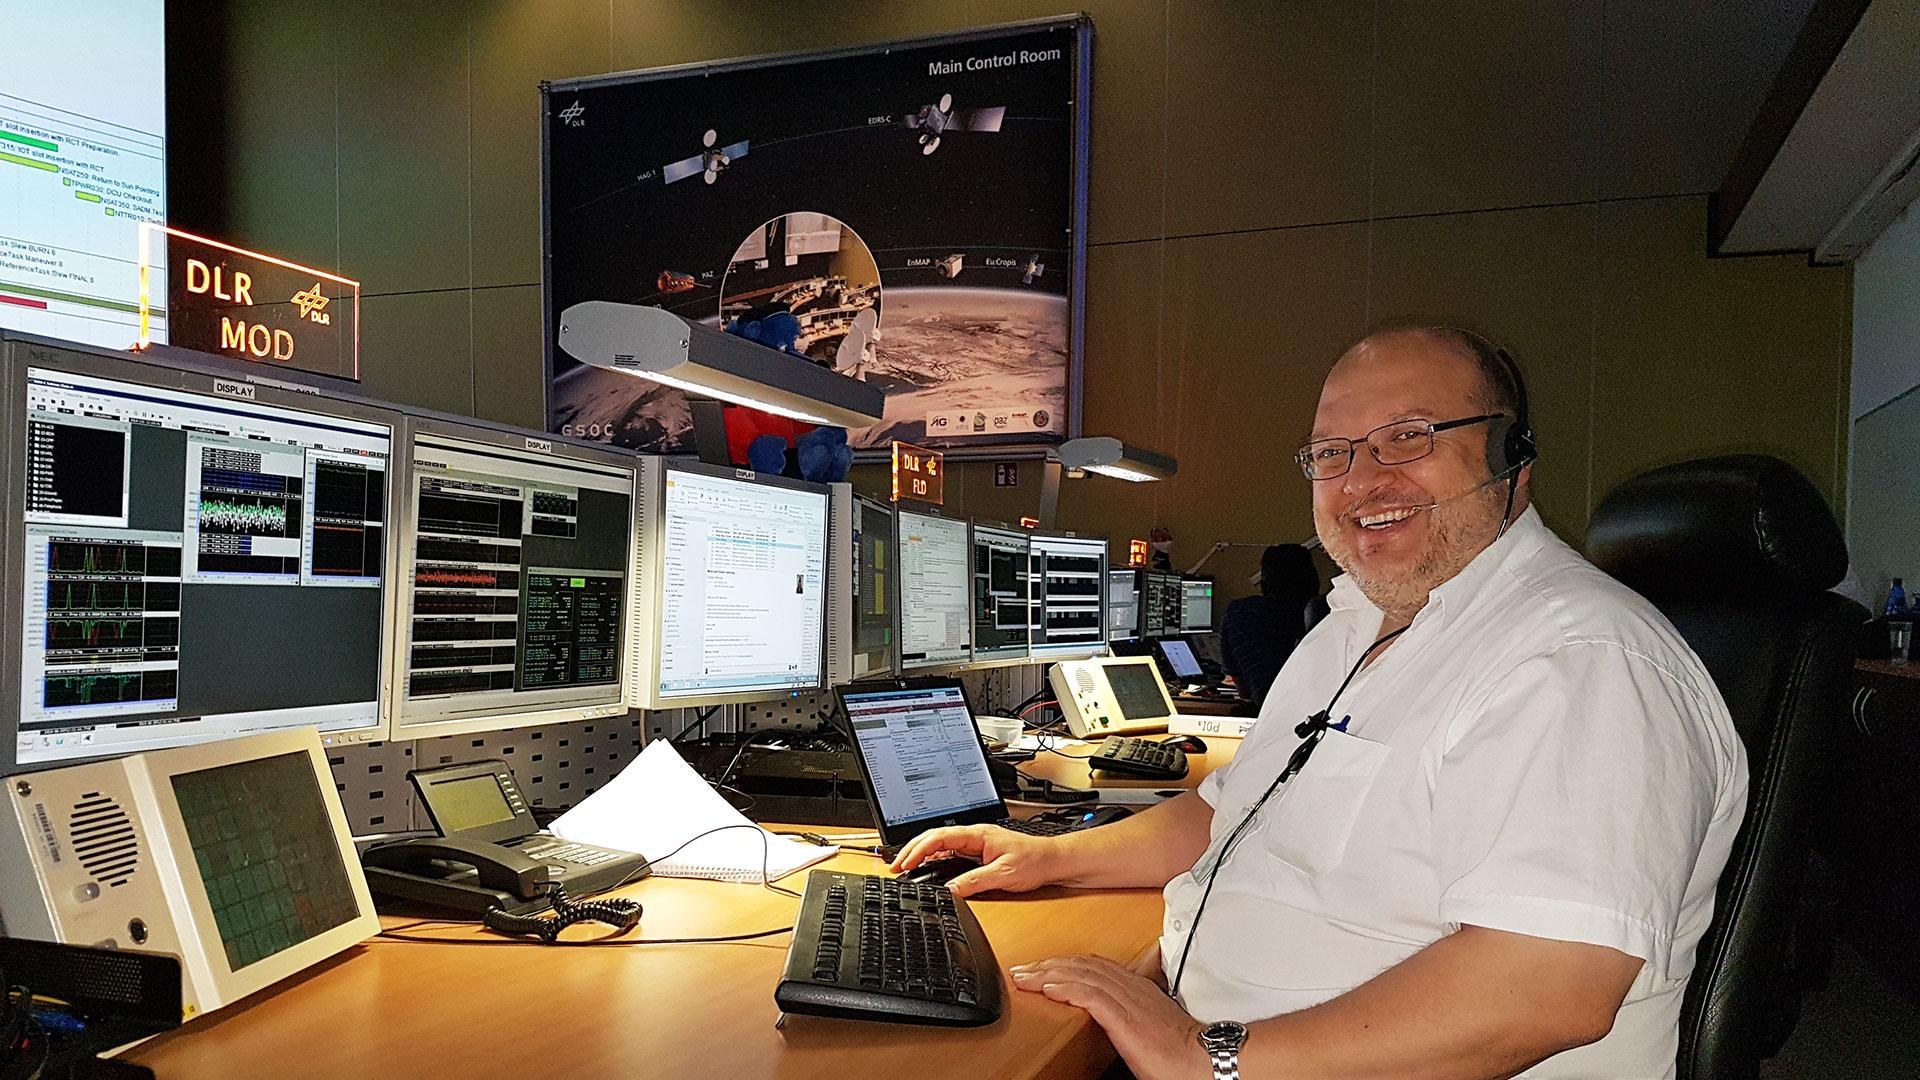 Ralf Faller in the EDRS control room